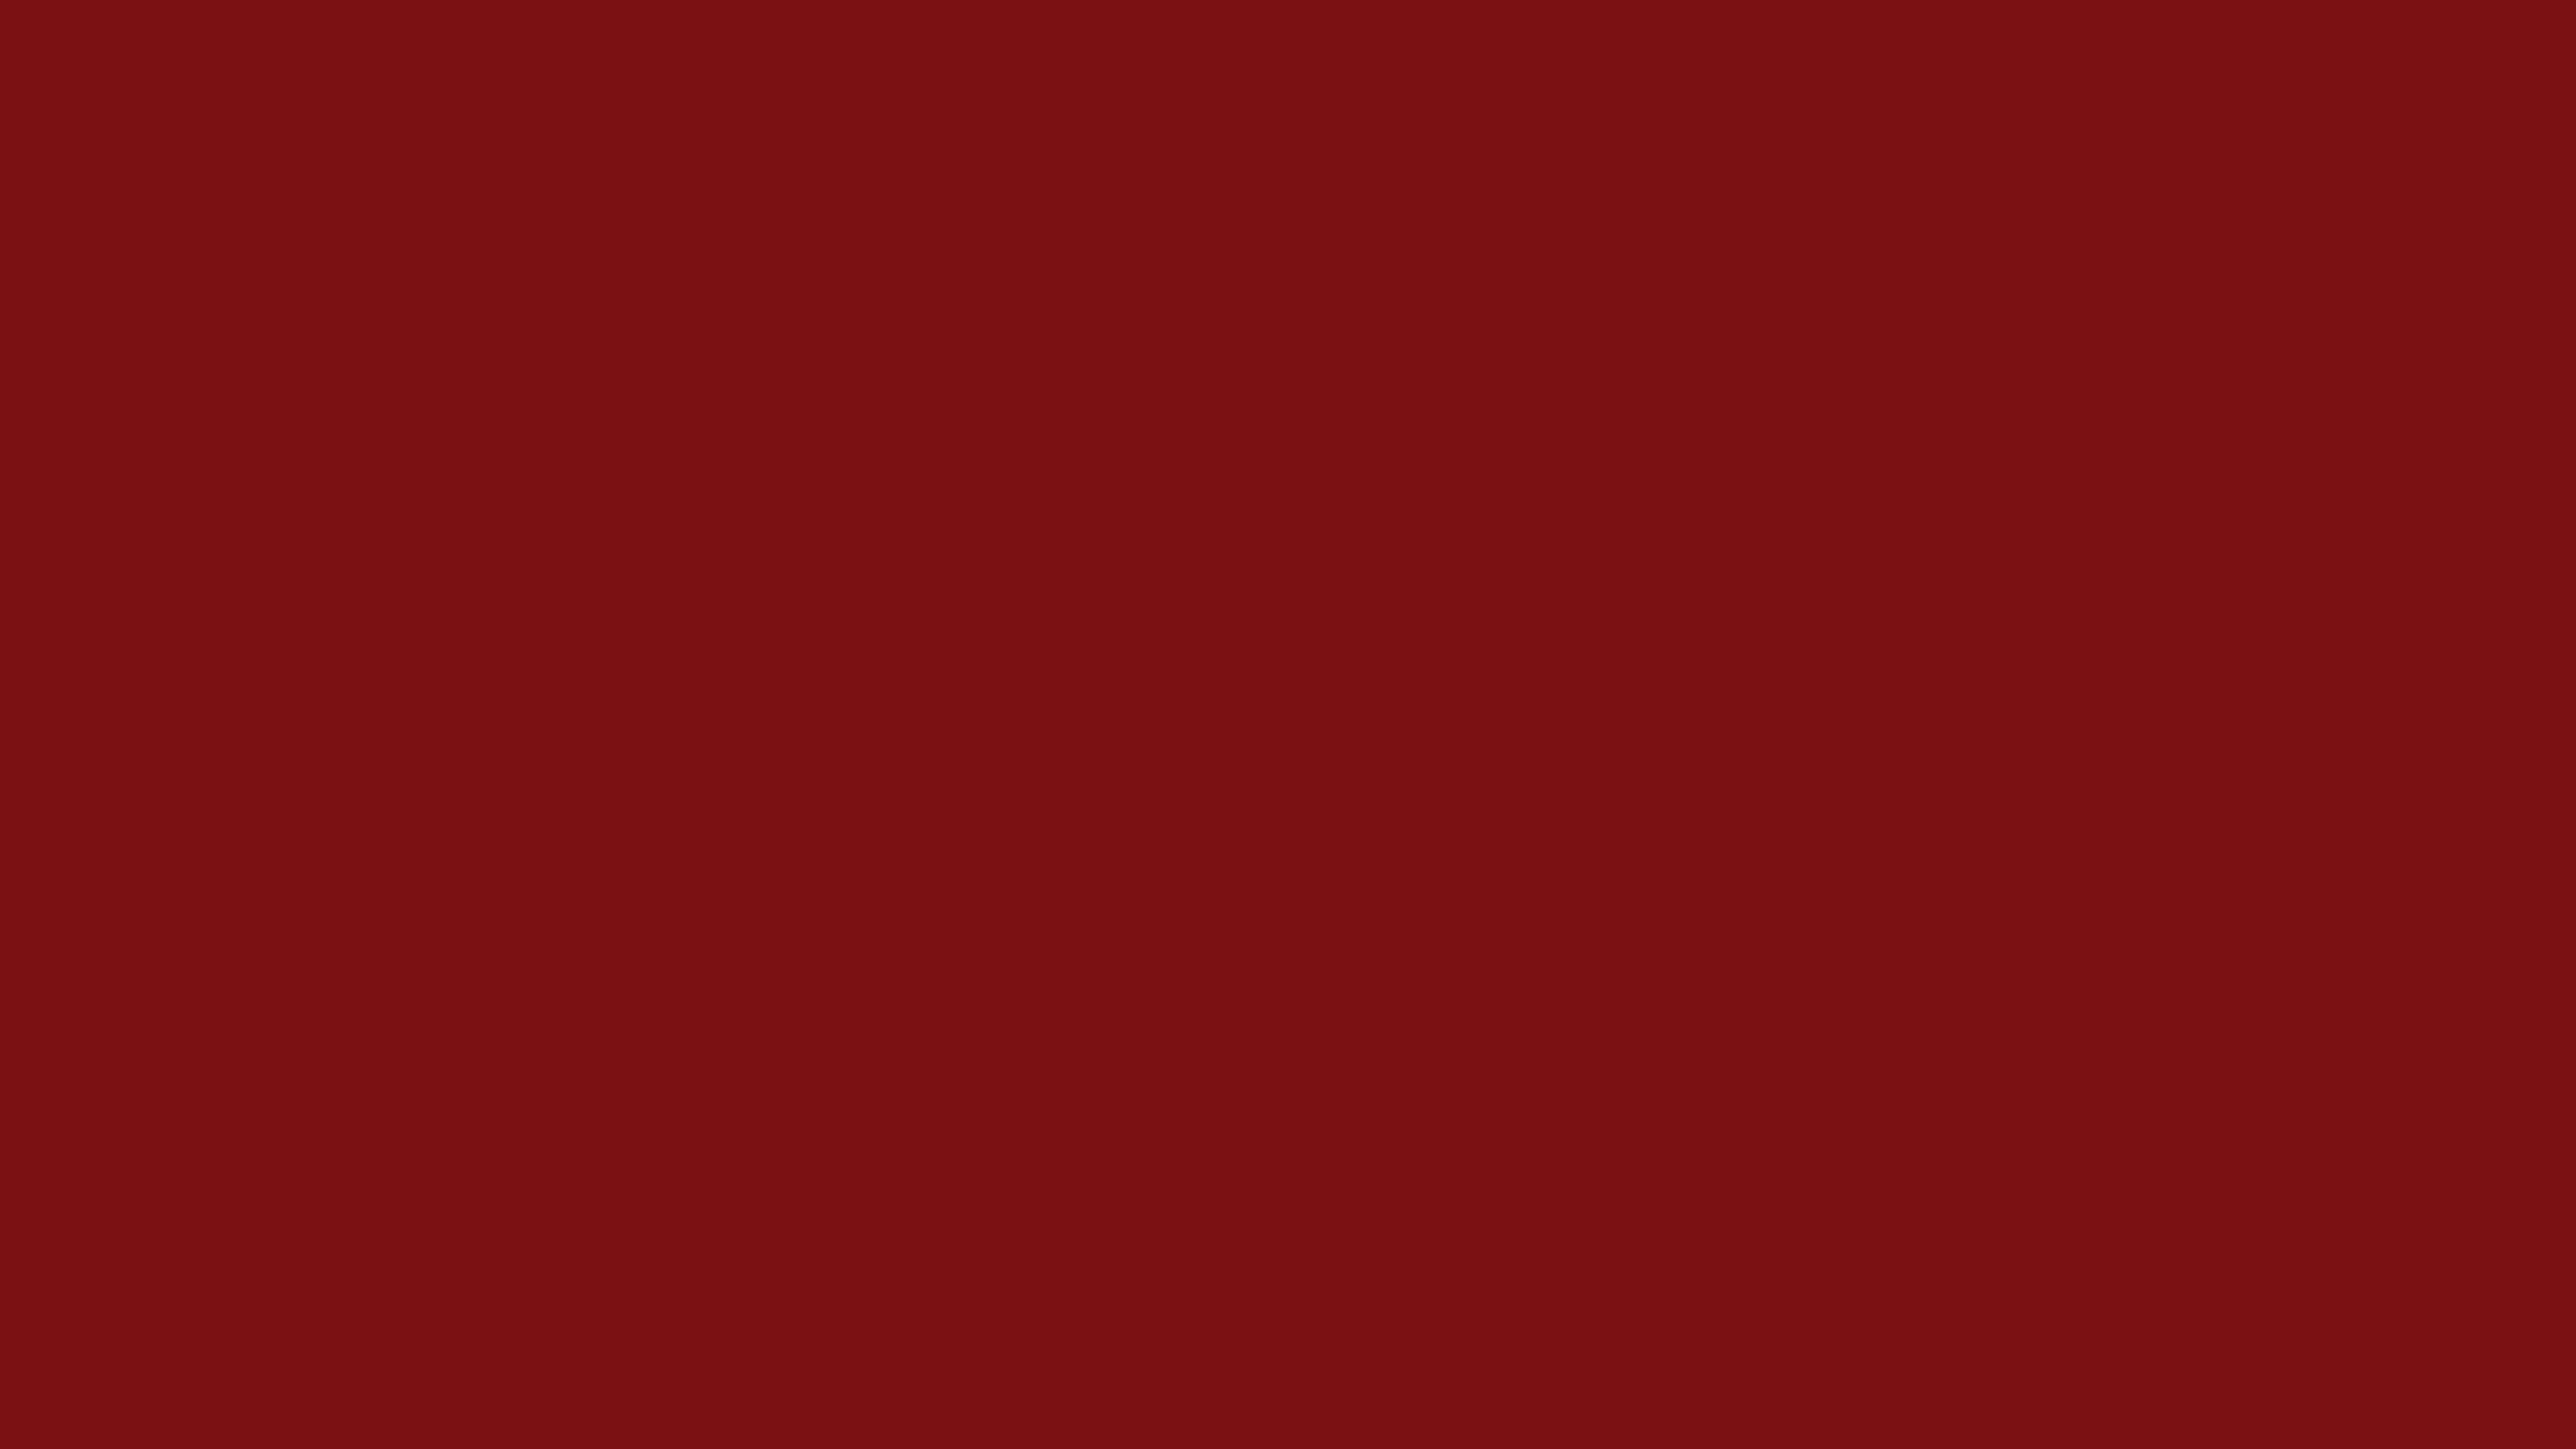 3840x2160 UP Maroon Solid Color Background